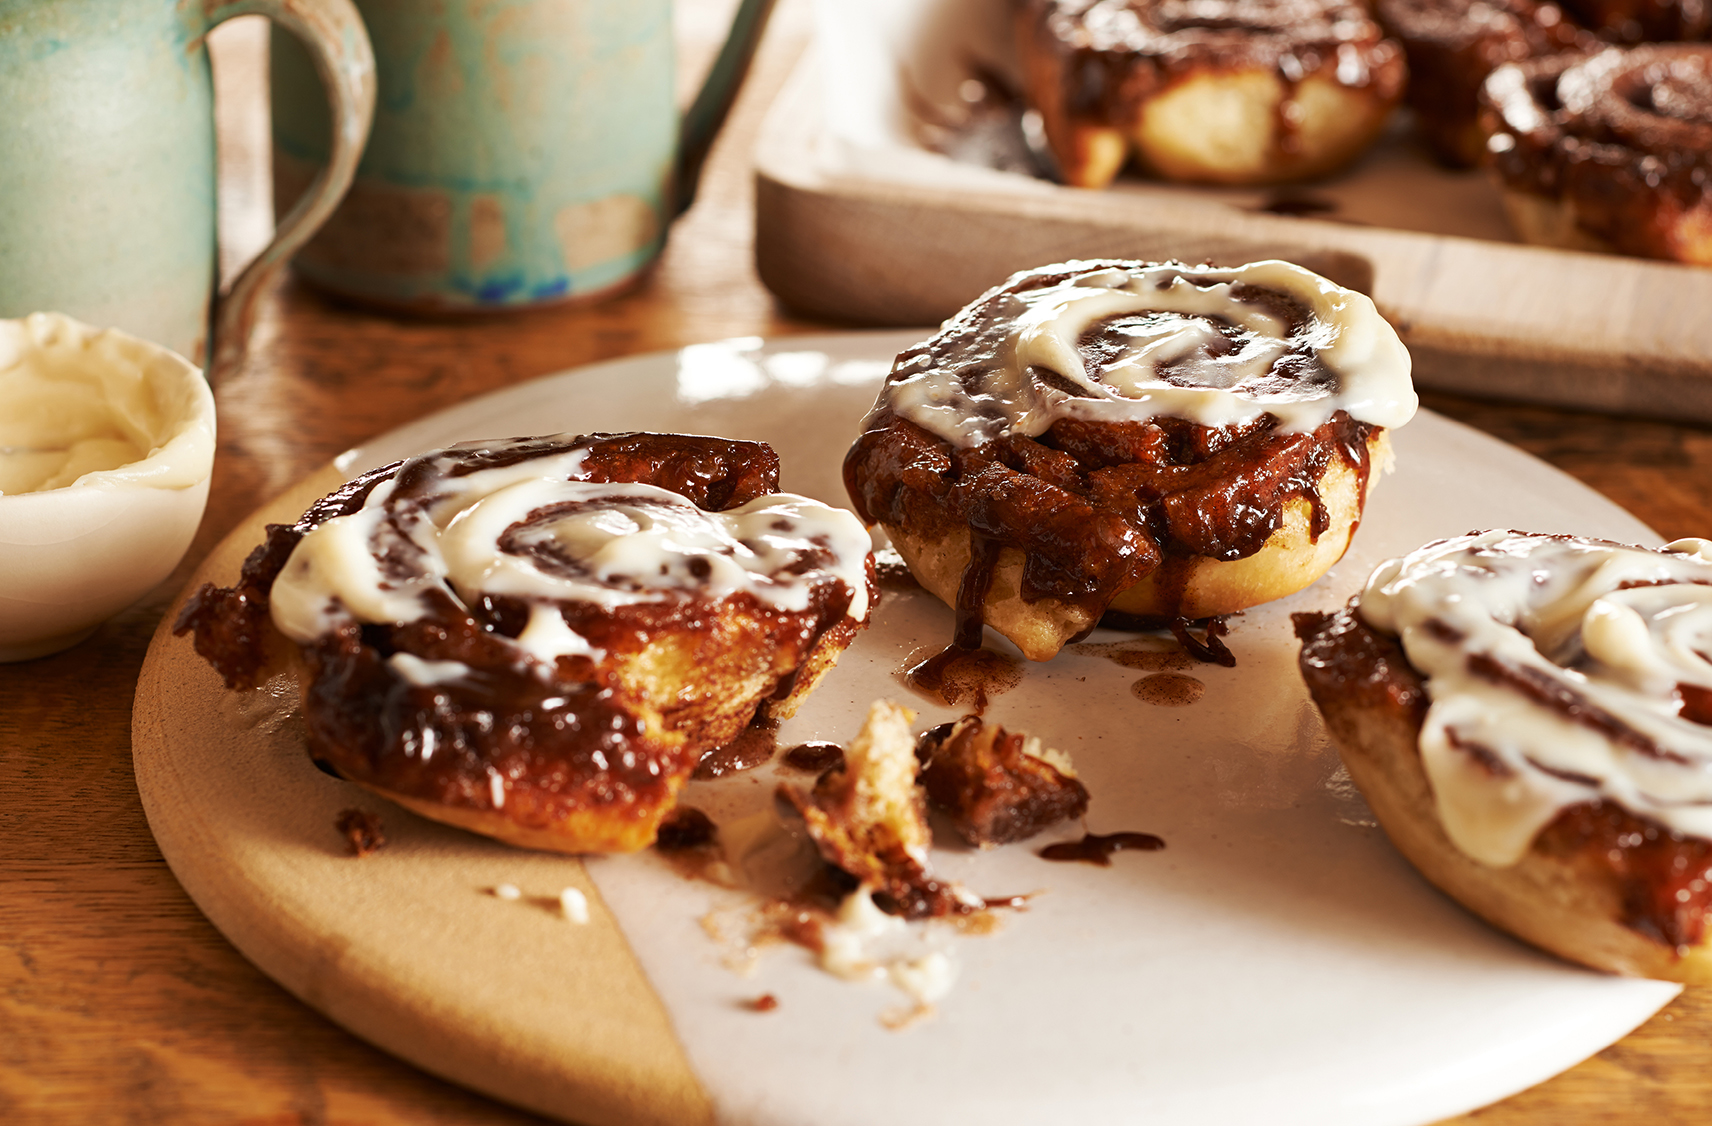 Two freshly baked and sticky cinnamon buns topped with white icing